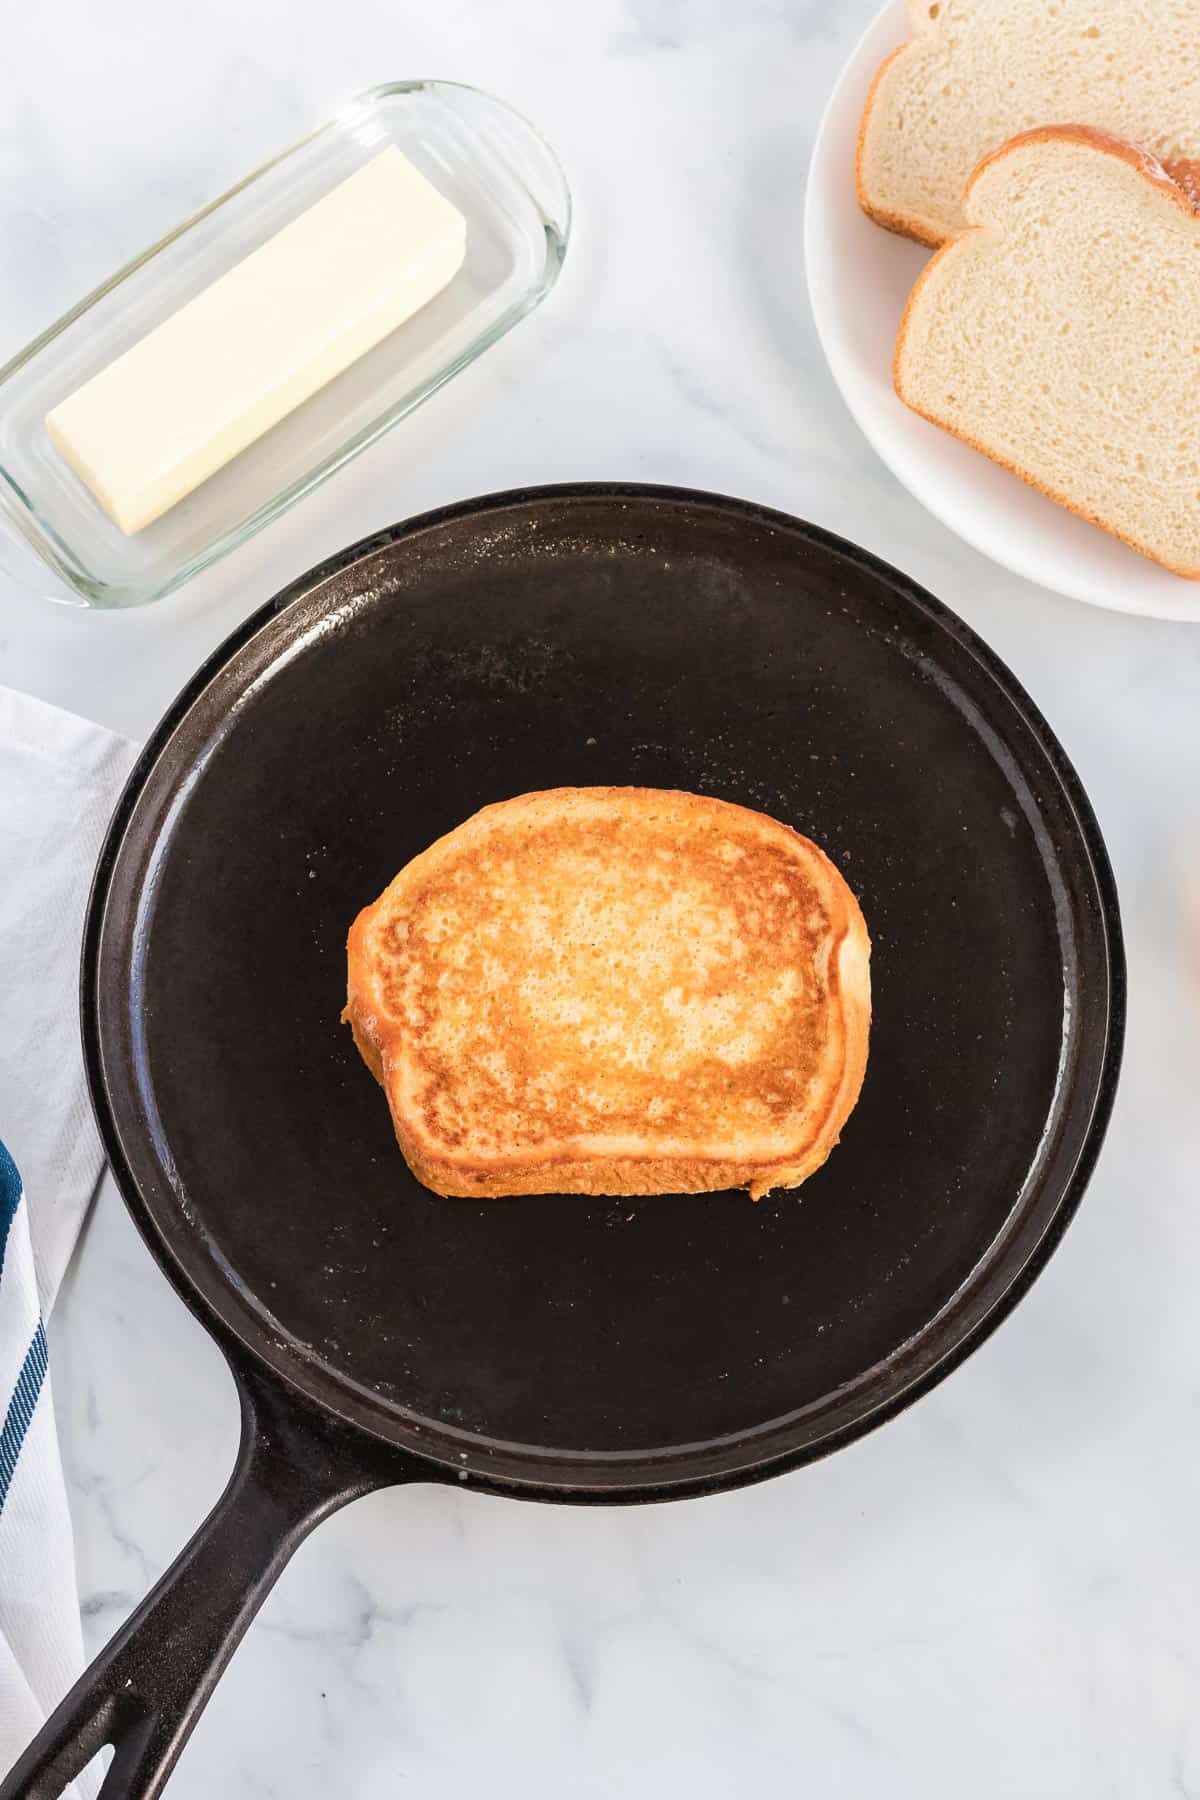 cooking the french toast in a cast iron skillet